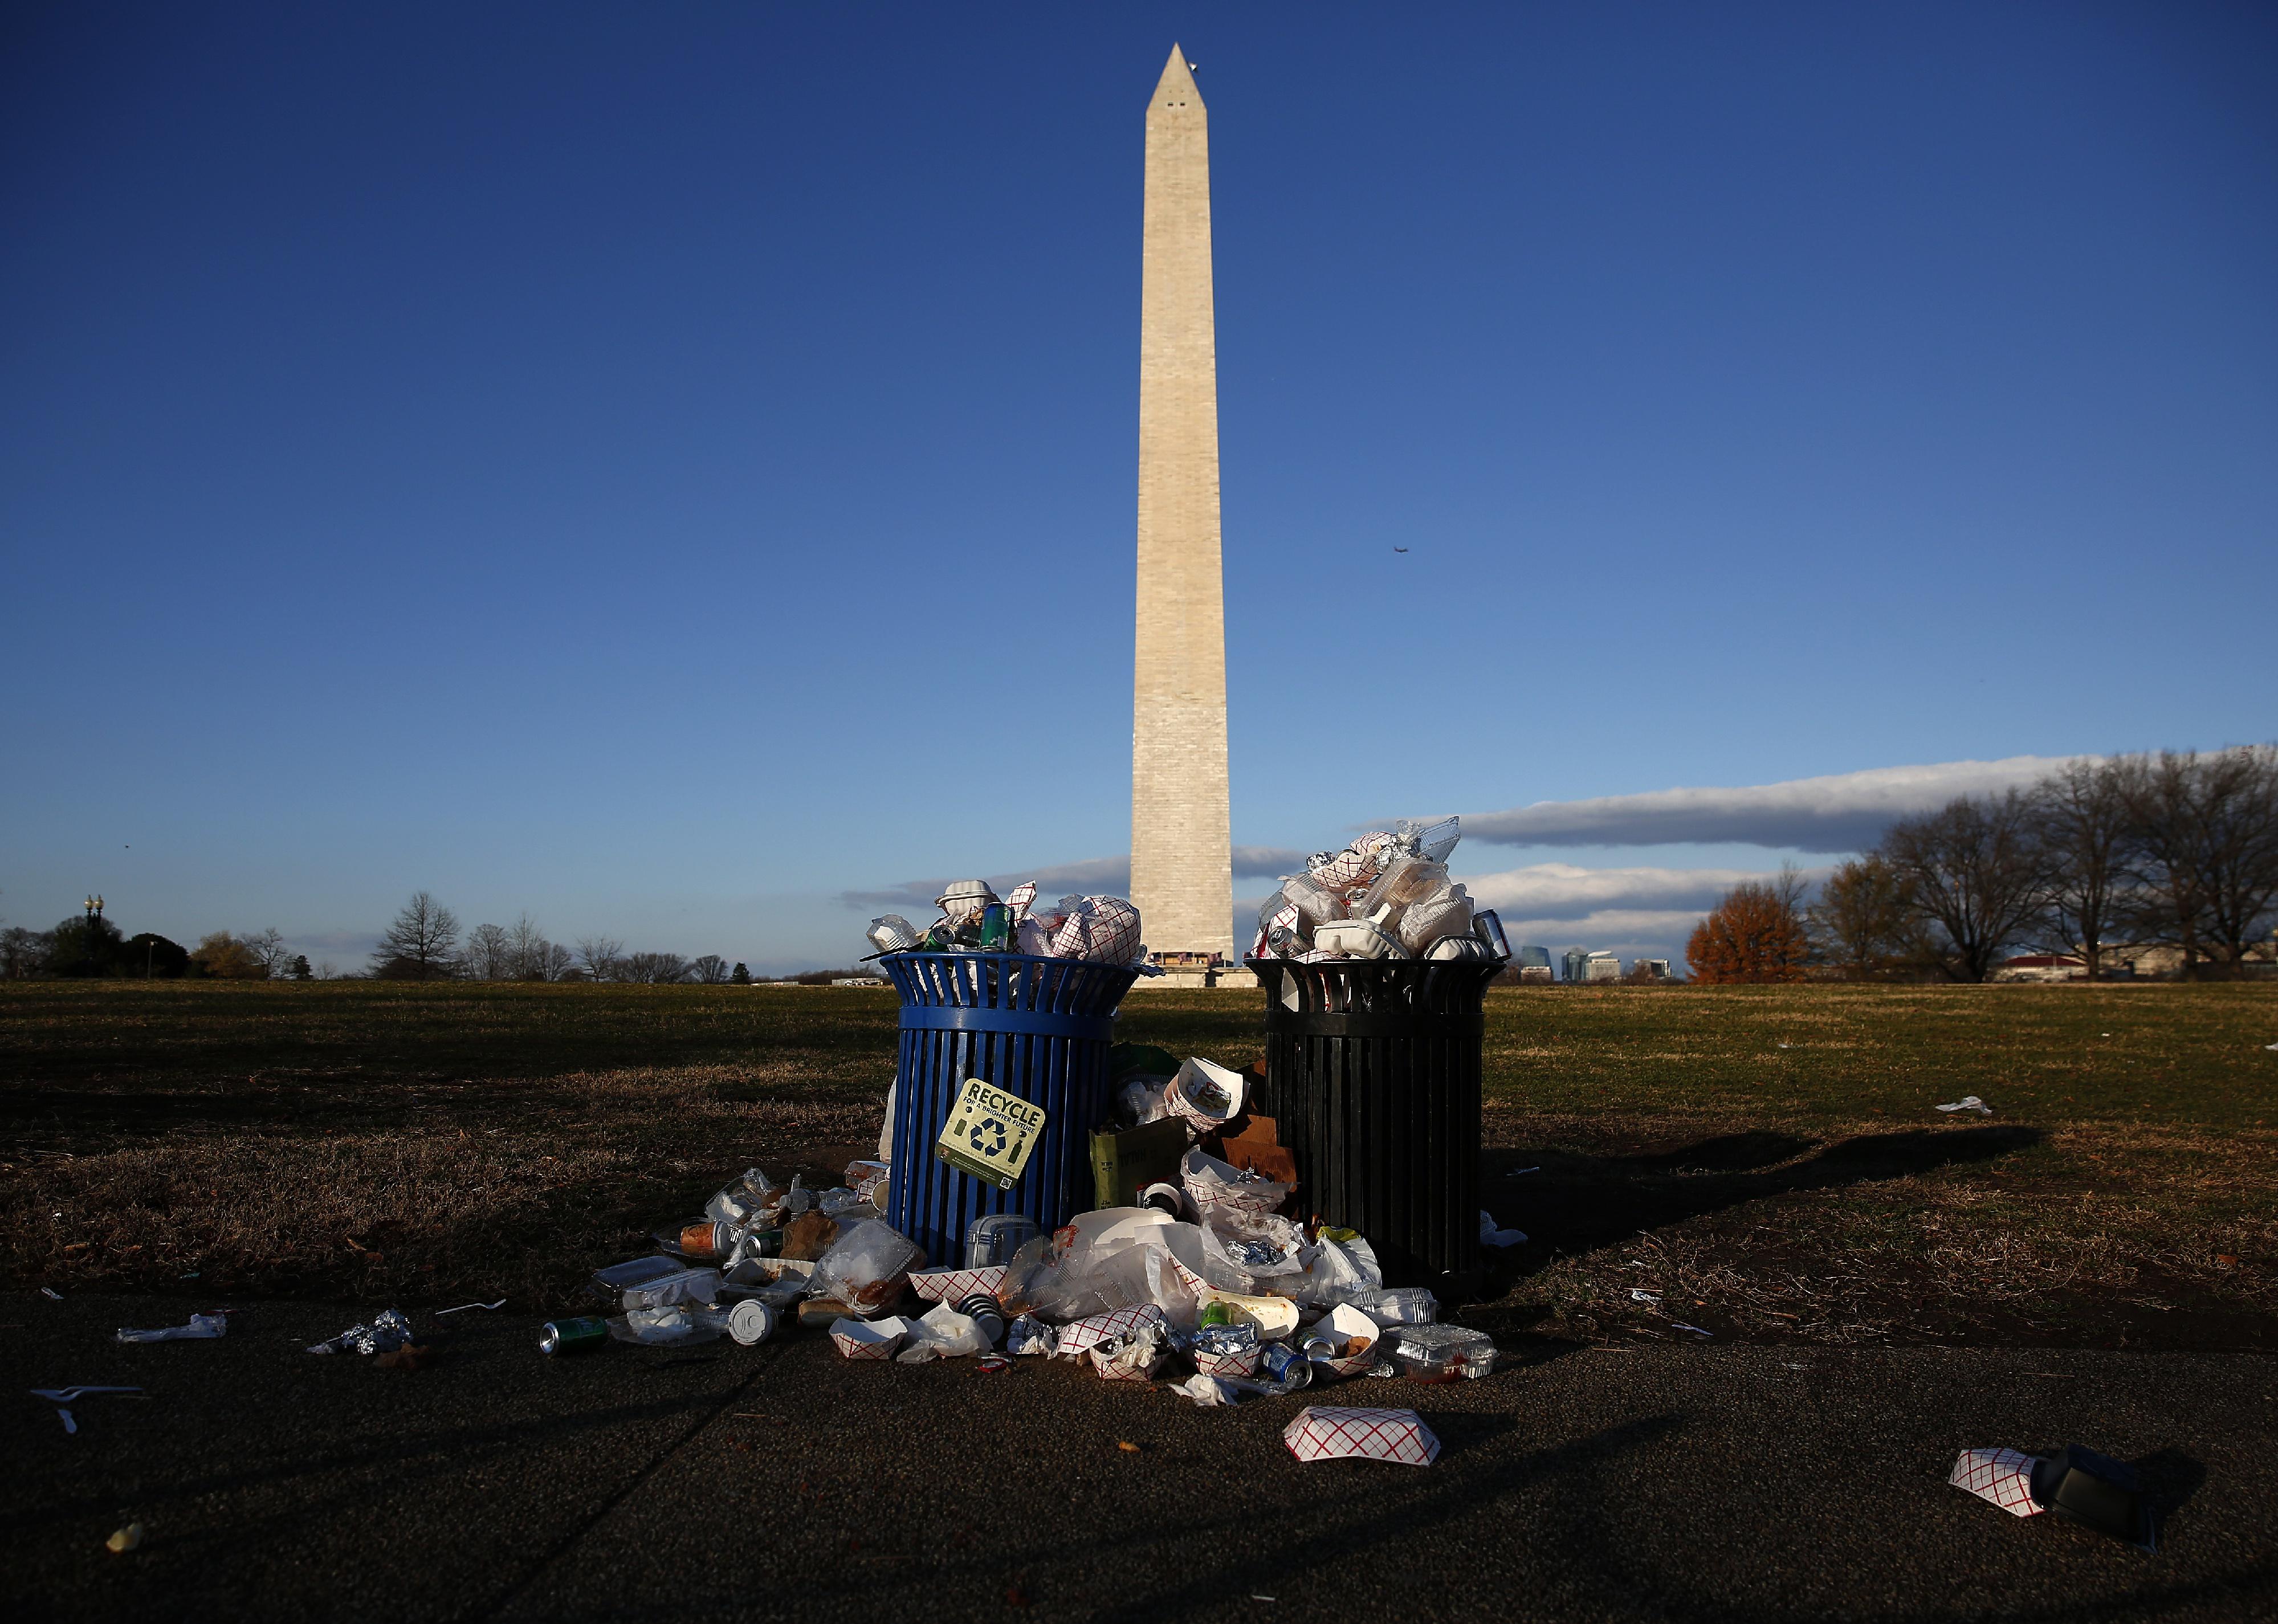 Trash begins to accumulate along the National Mall near the Washington Monument.